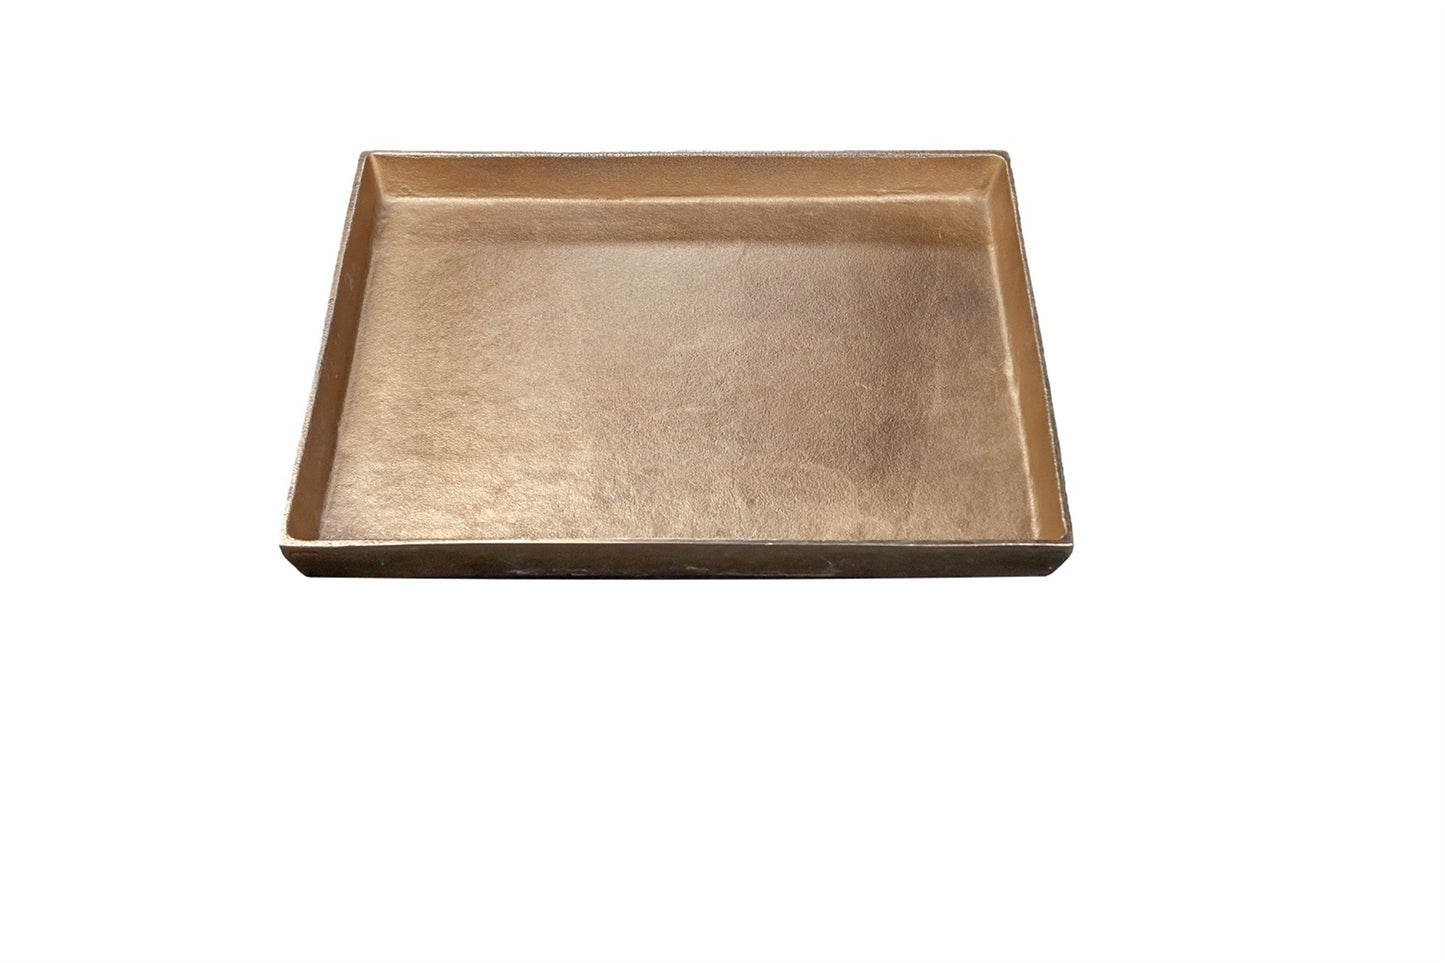 435131 Small Antique Brass Tray